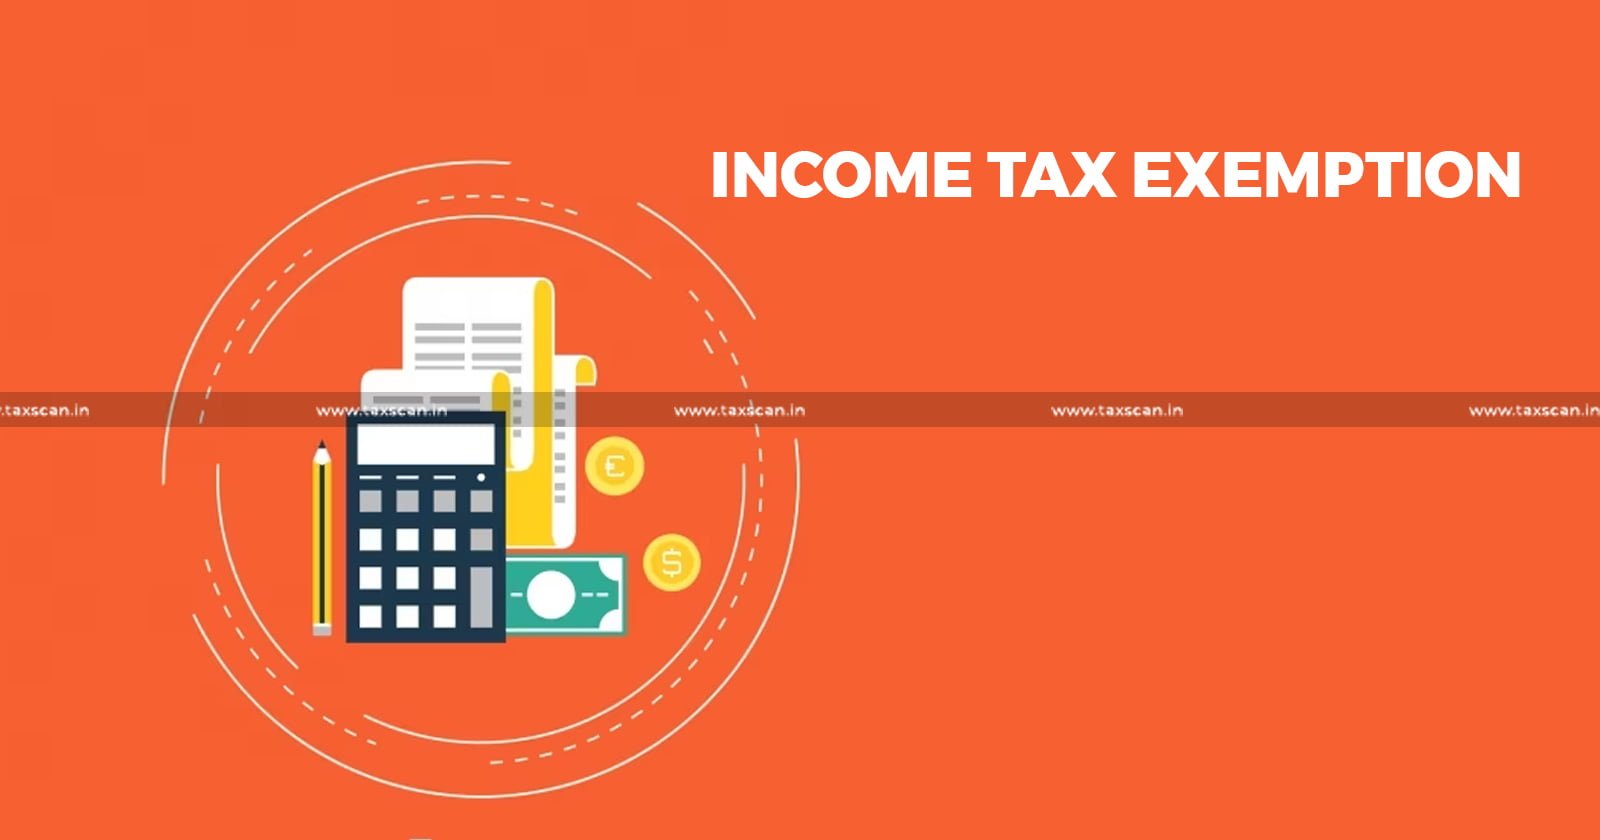 cbdt-notifies-income-tax-exemption-to-karnataka-state-building-and